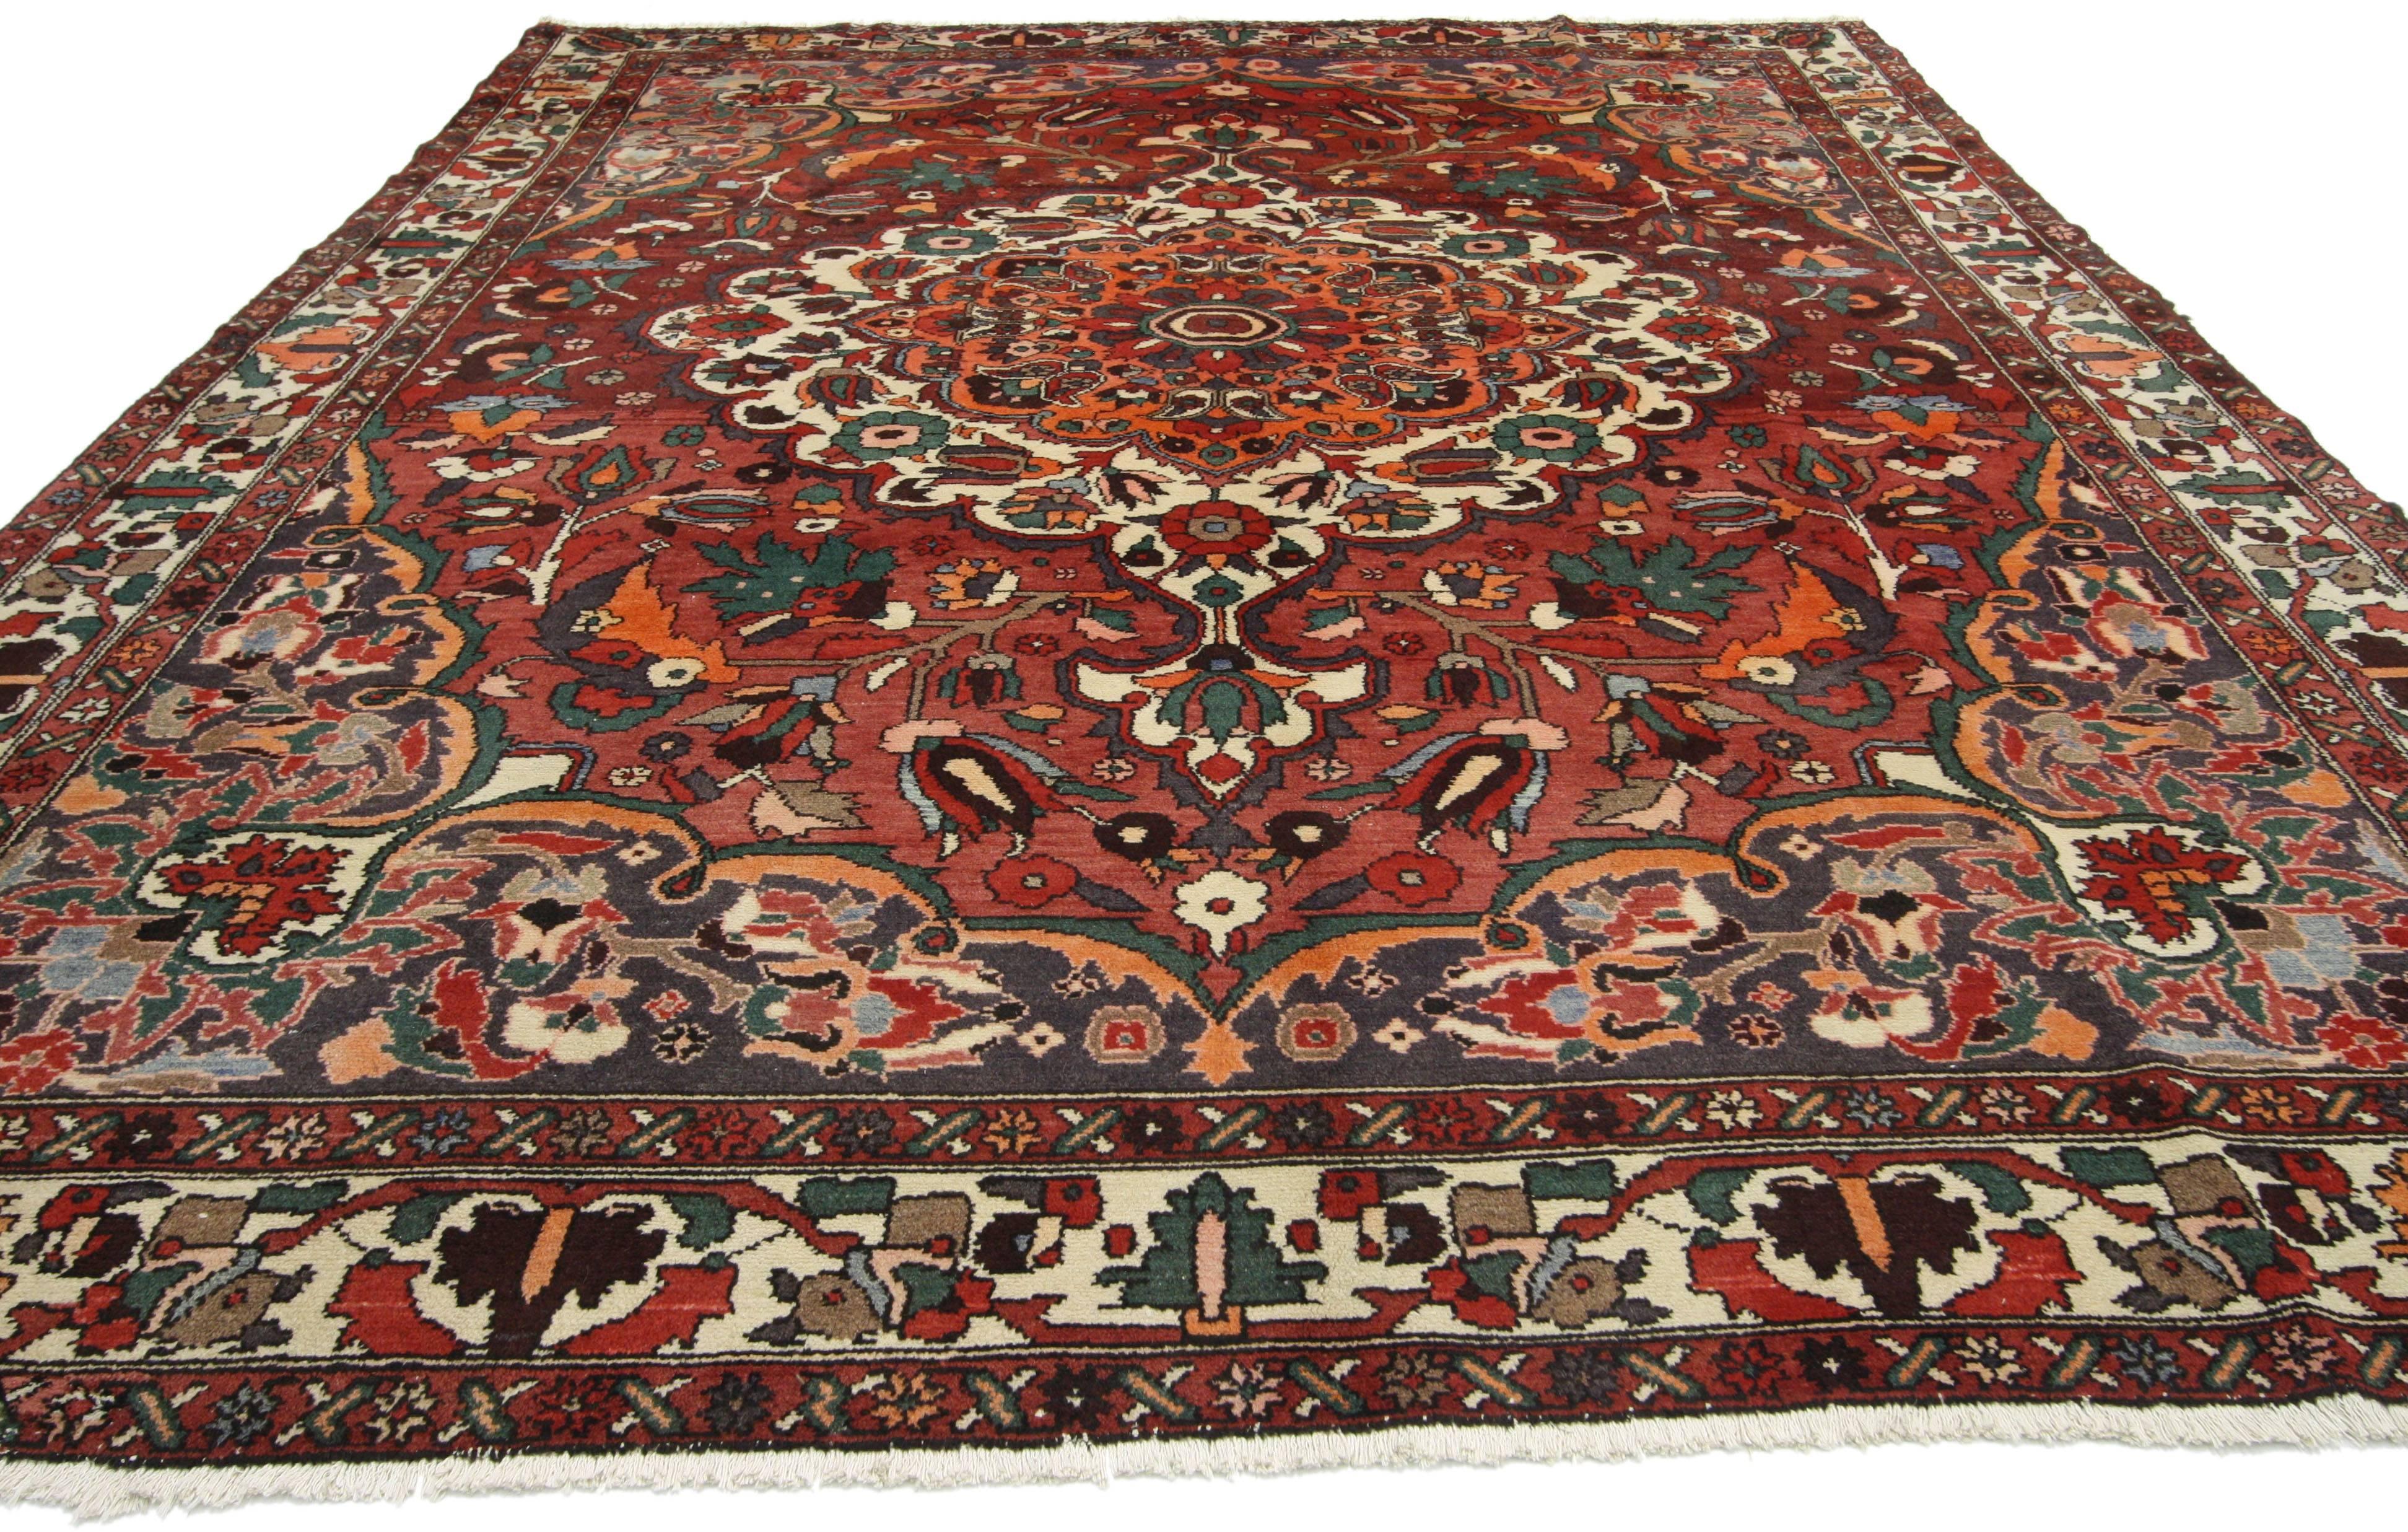 76142, vintage Persian Bakhtiari rug with traditional style. This hand-knotted vintage Persian Bakhtiari rug with traditional style features a central medallion filled with an array of lotus, Iris and Peony flowers surrounded by lush palmettes,